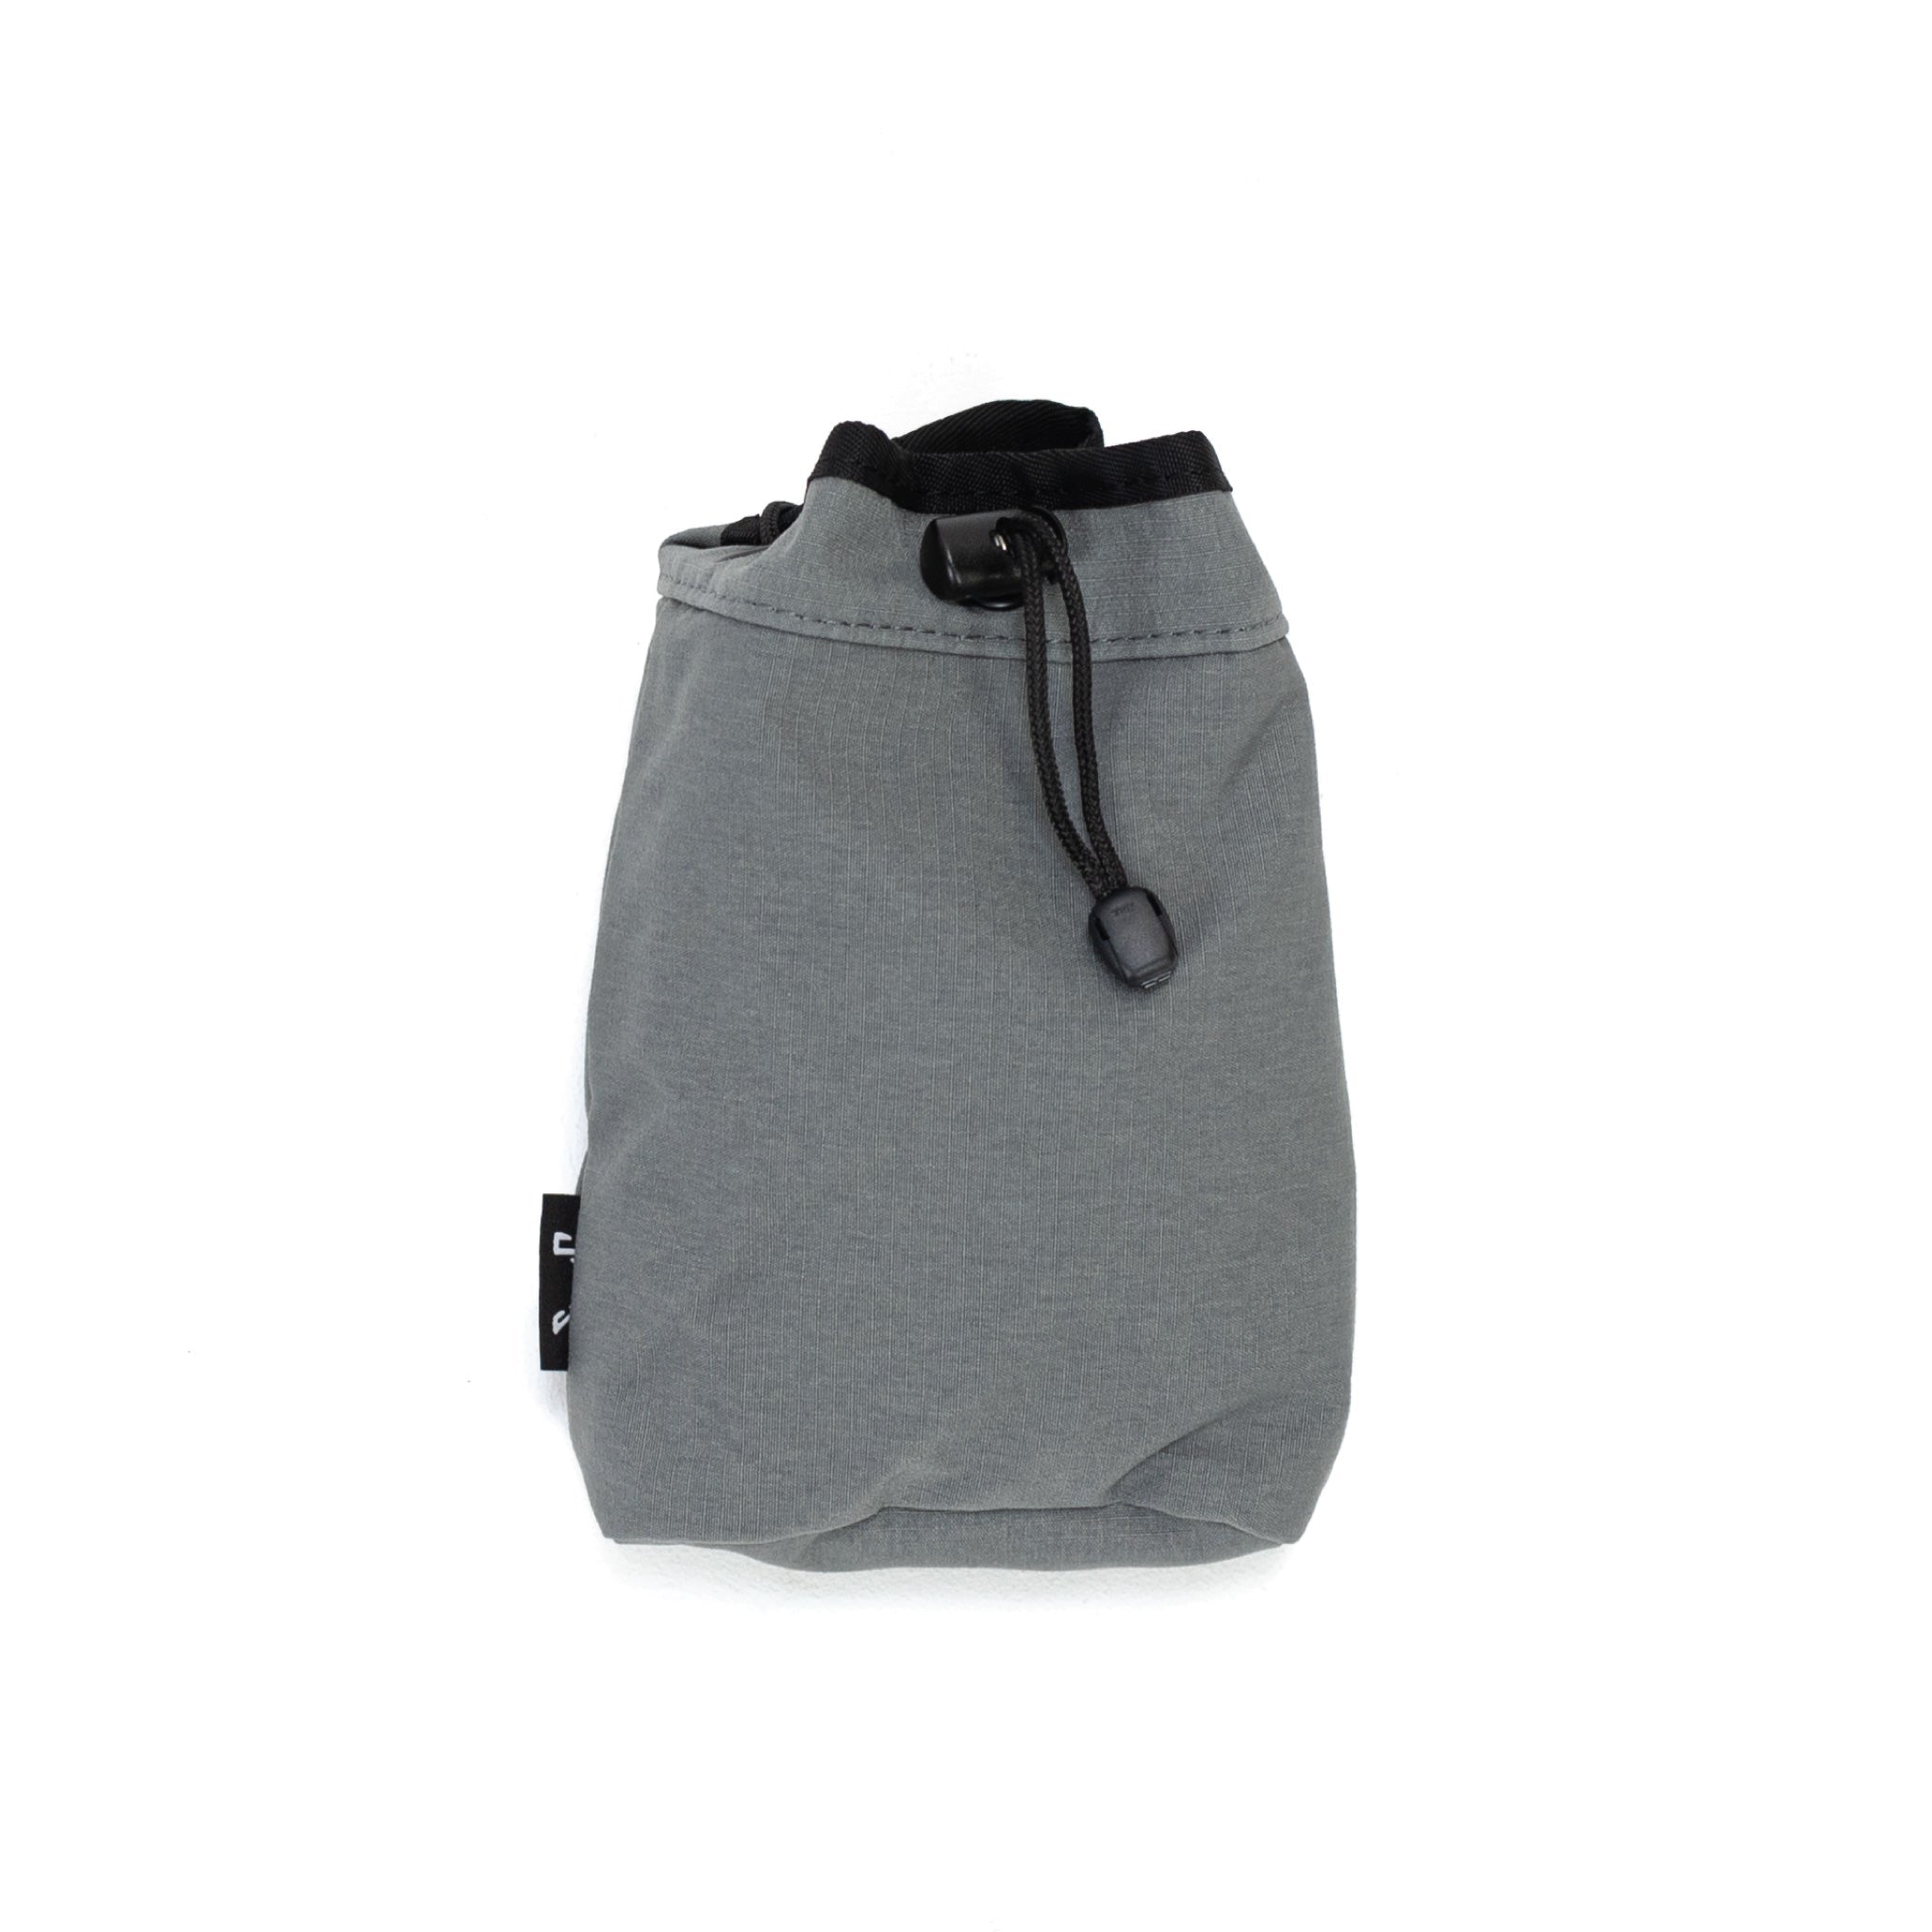 Jones Sports Co. Rangefinder Pouch - Charcoal